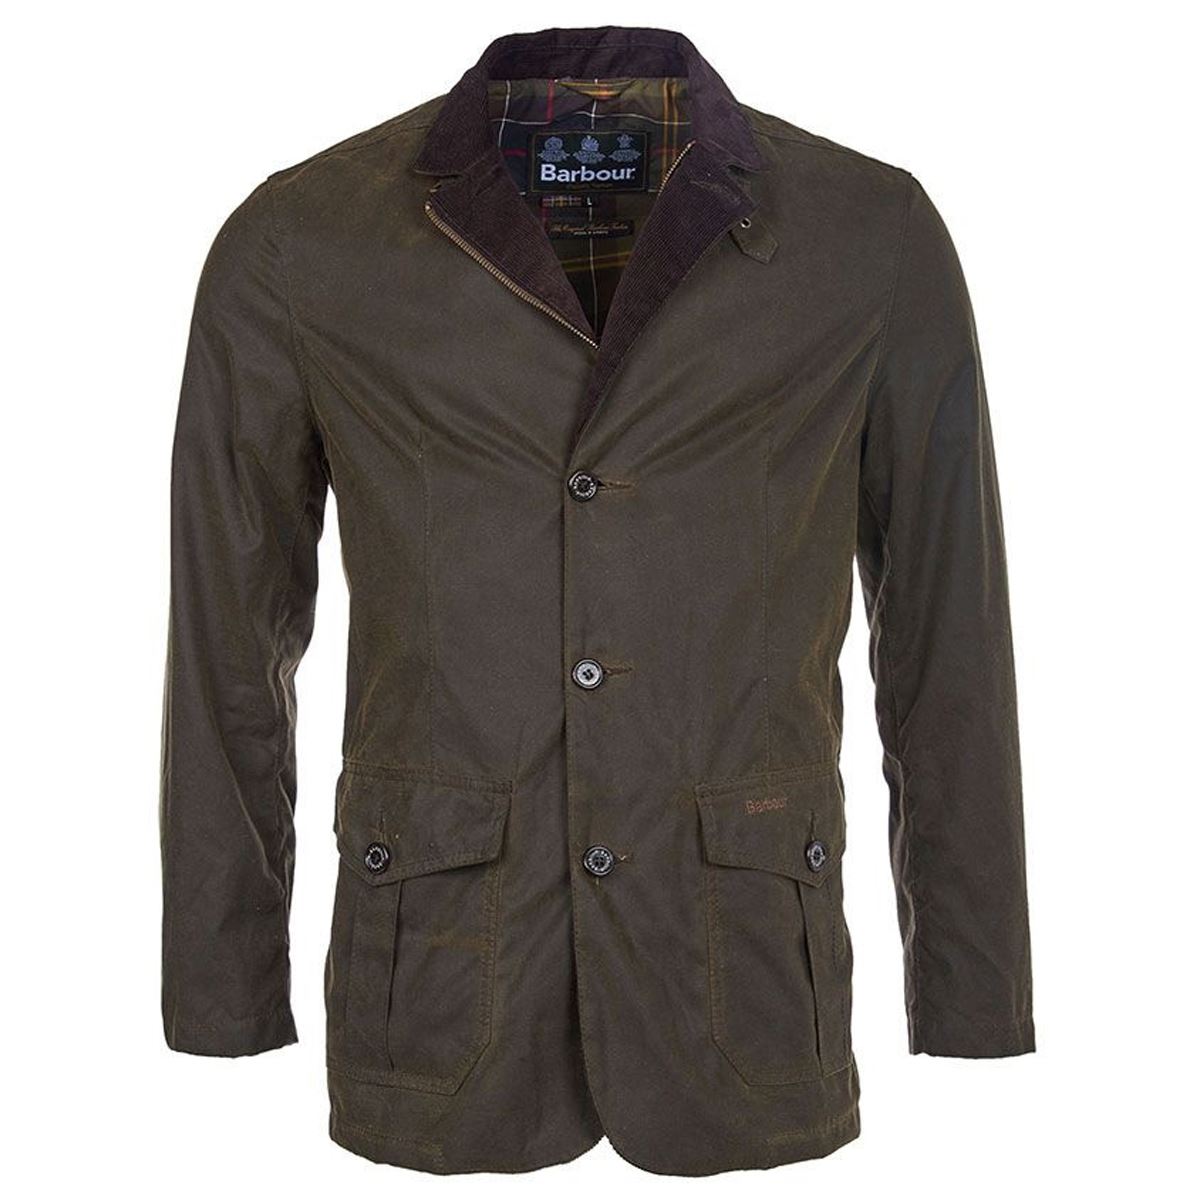 What are the features of the Barbour Lutz Wax Jacket?